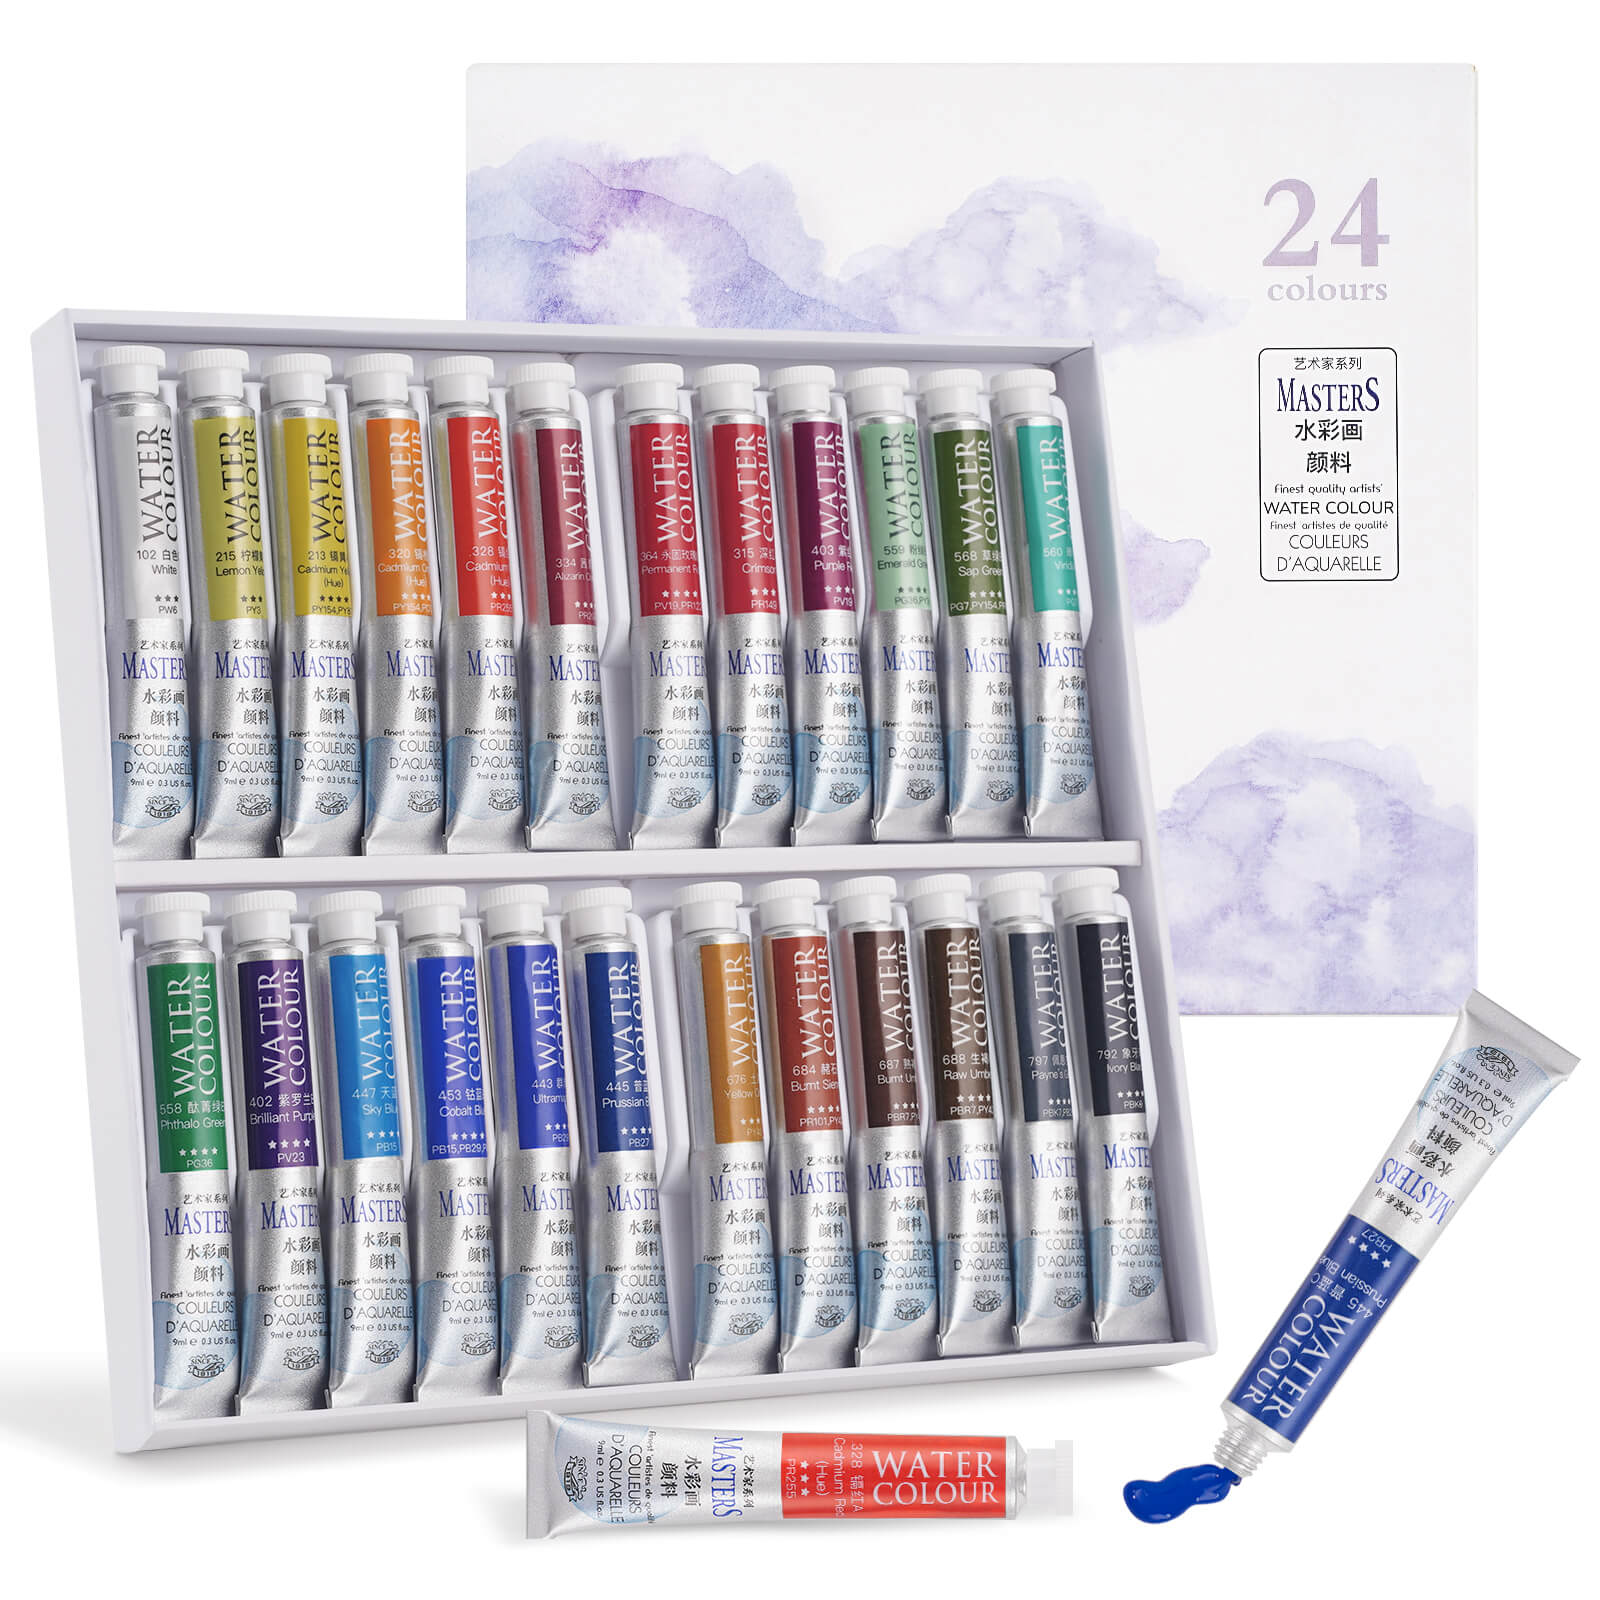 LIGHTWISH Marie's Masters 24-color Professional Watercolor Paint Tube Set